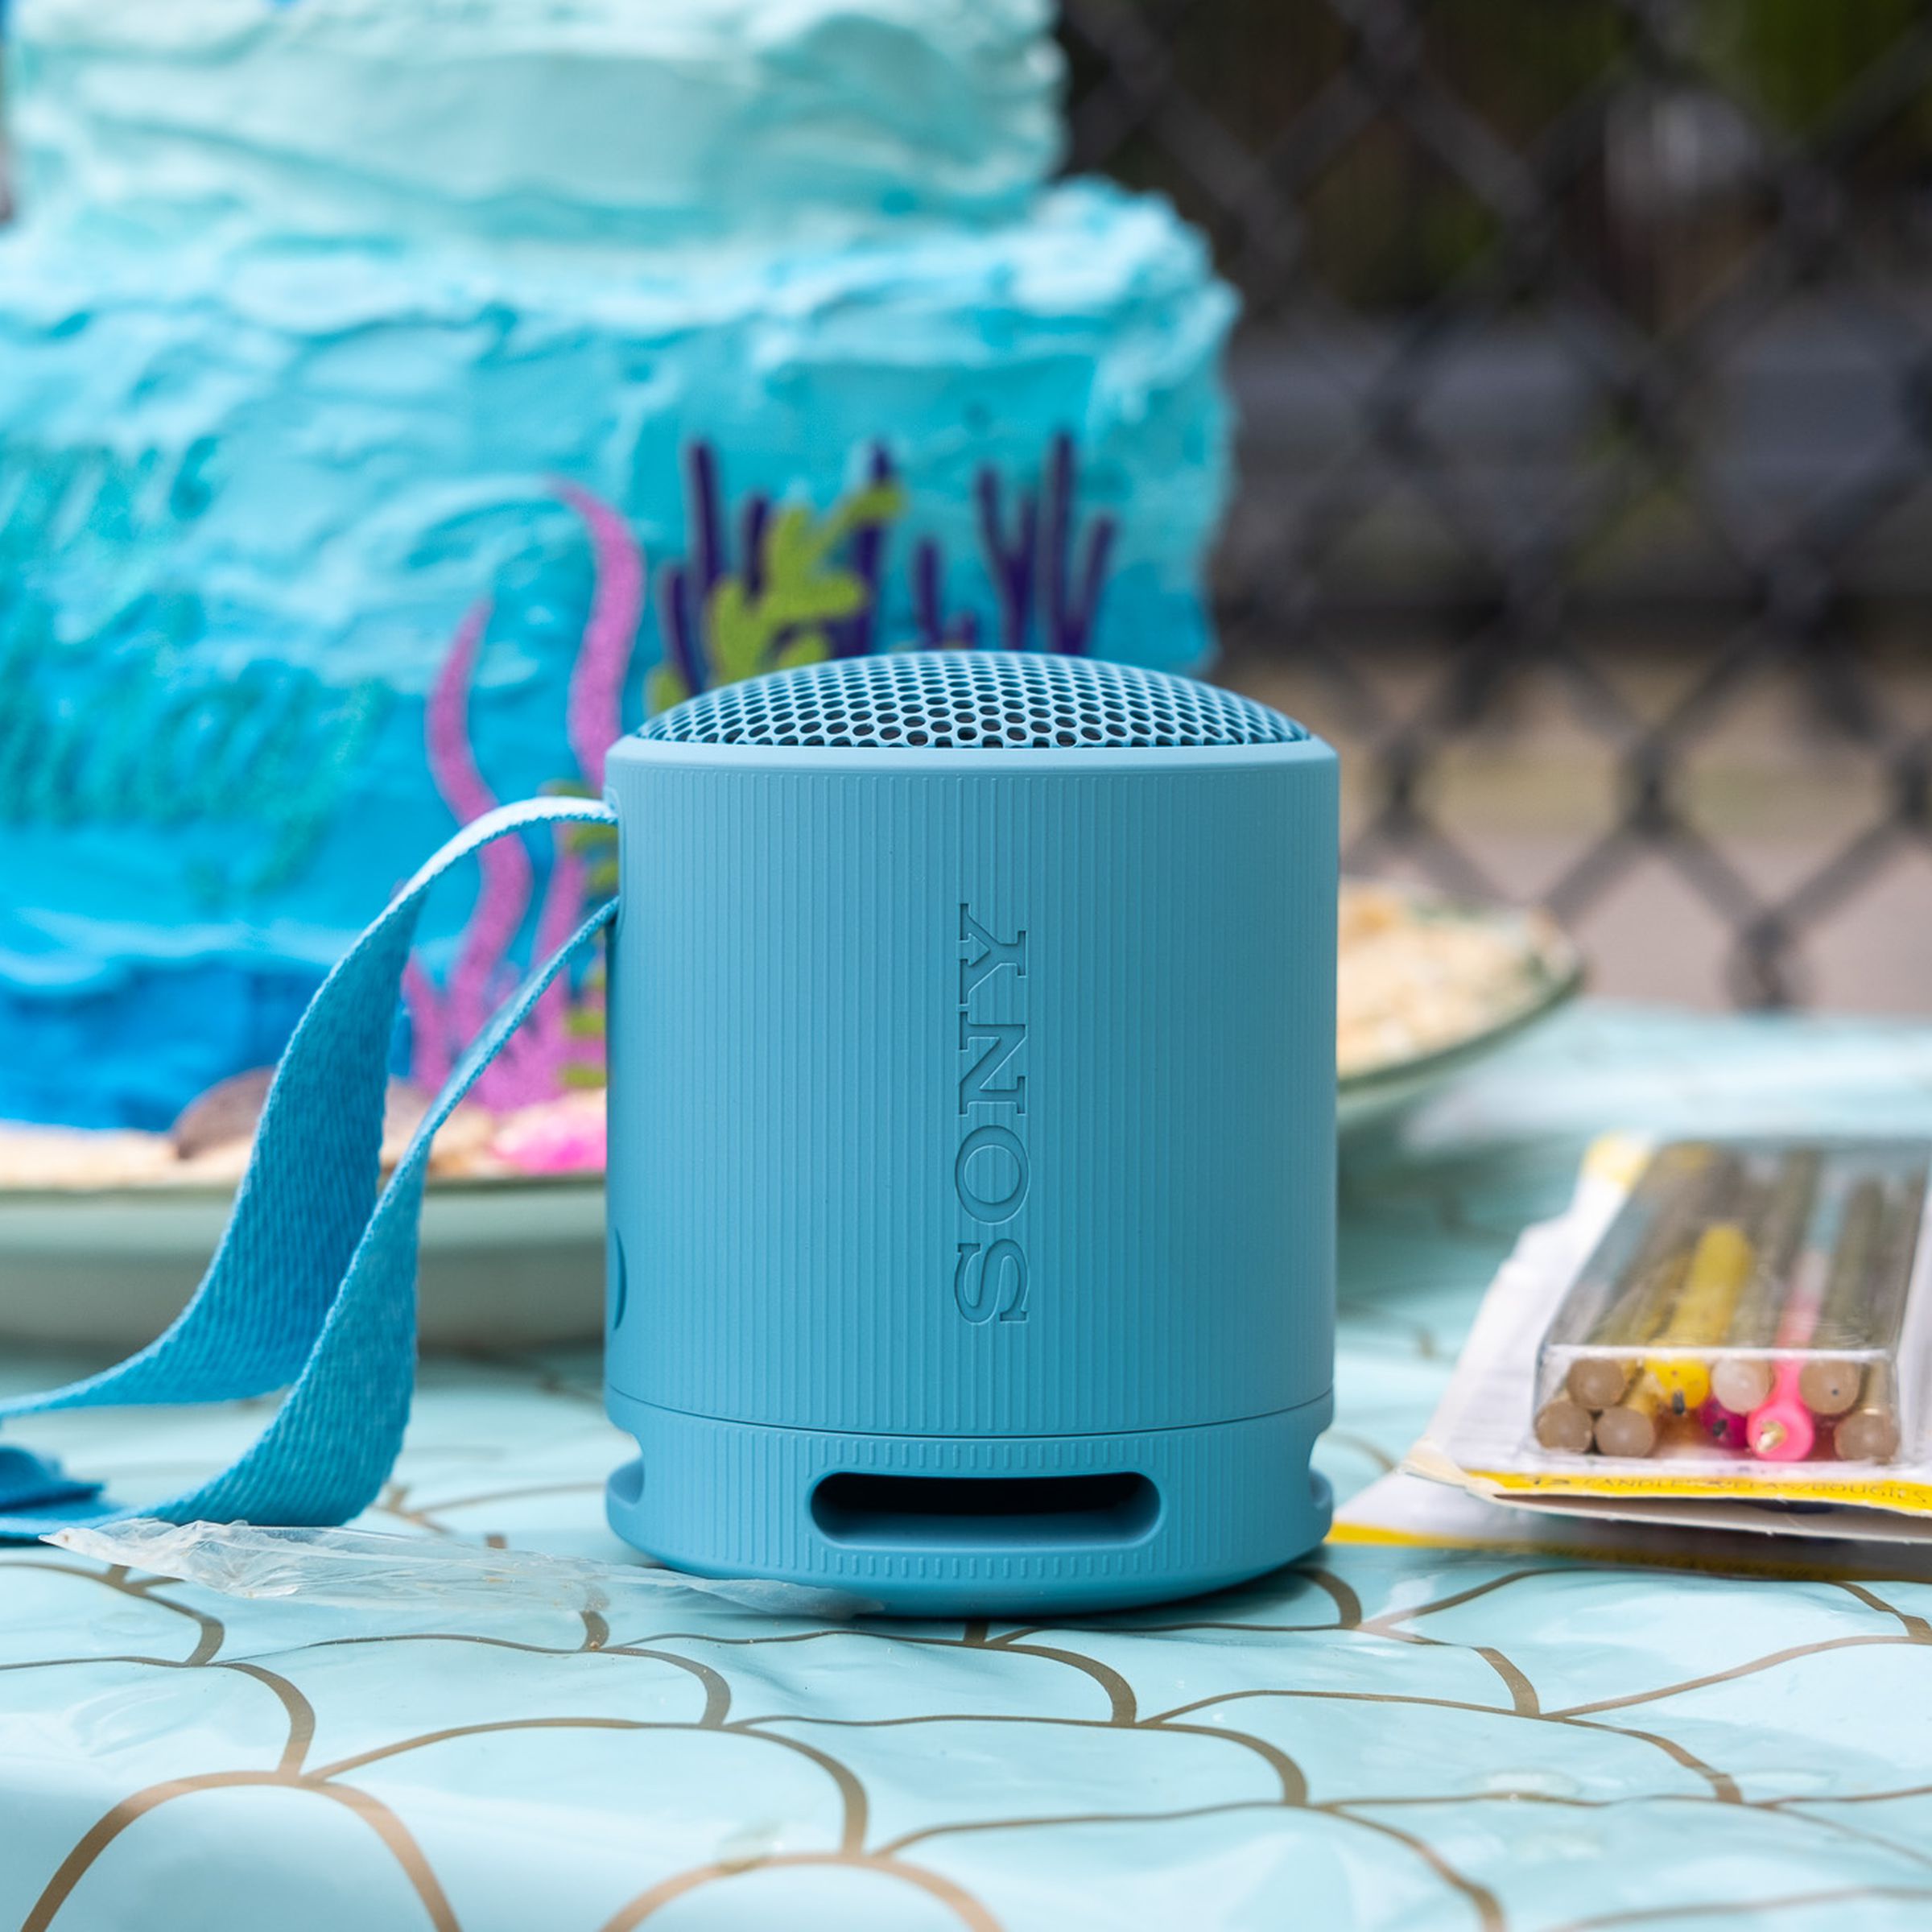 A photo of Sony’s compact SRS-XB100 Bluetooth speaker.